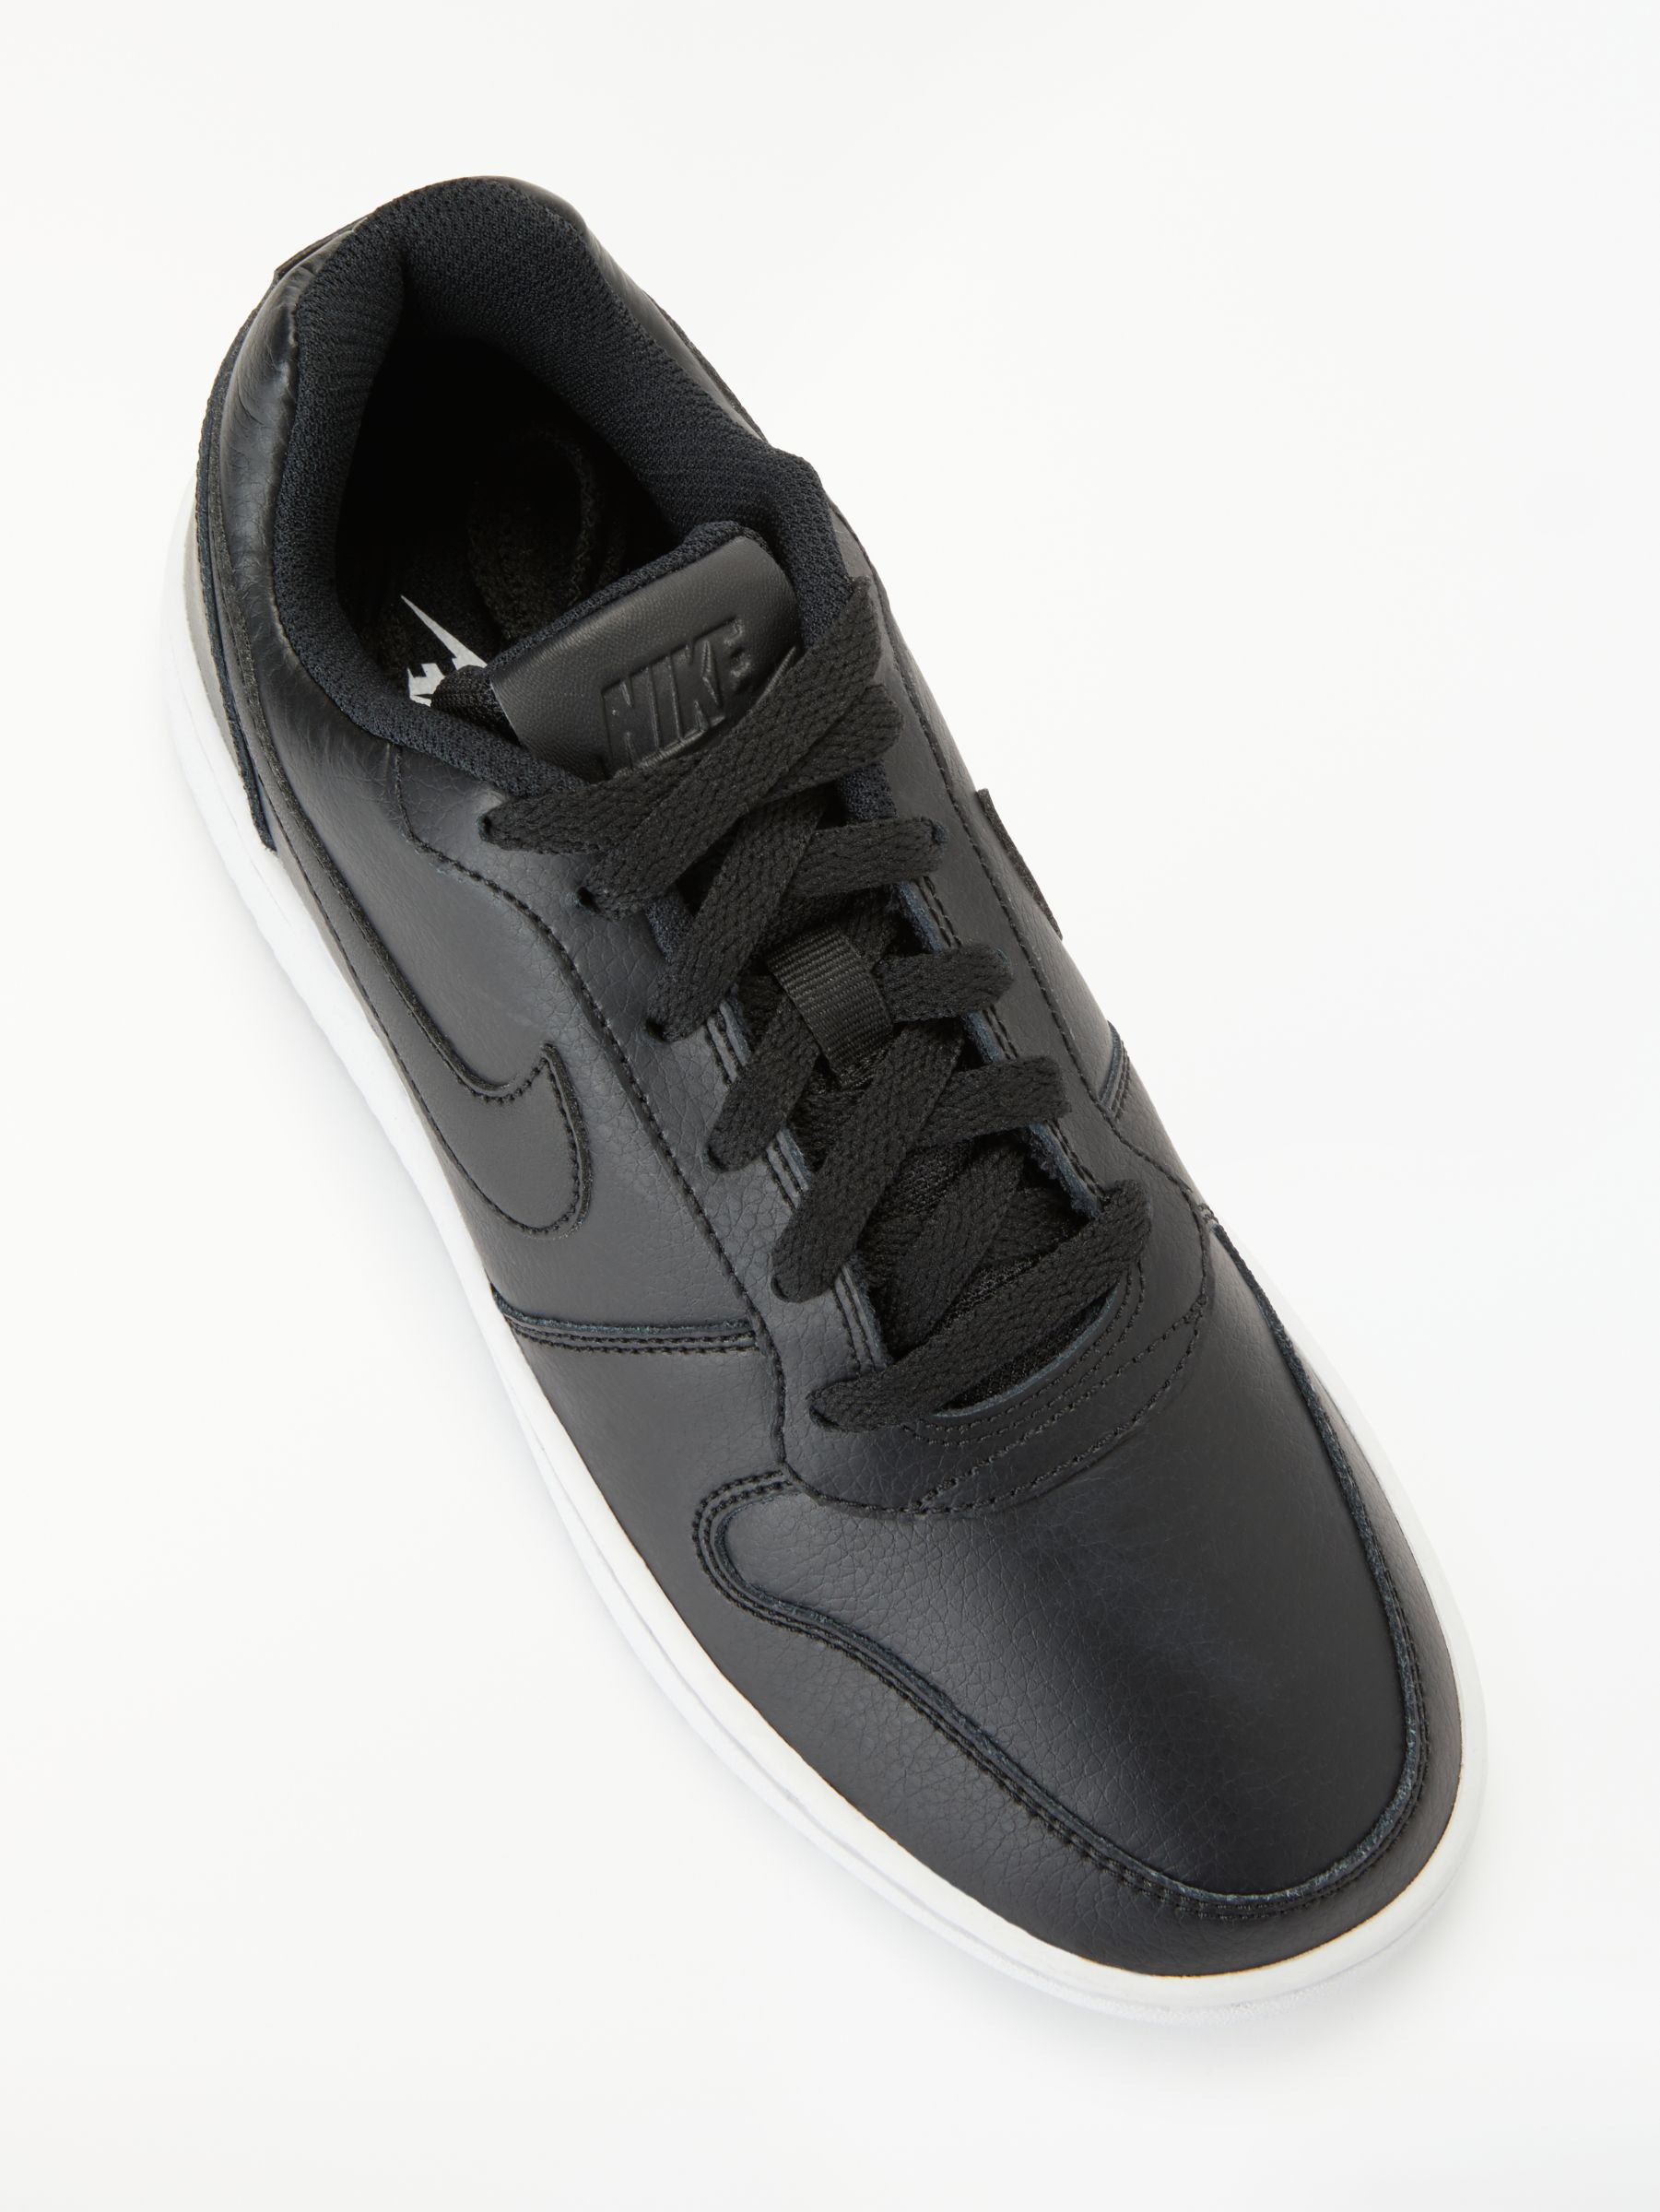 nike ladies trainers black and white